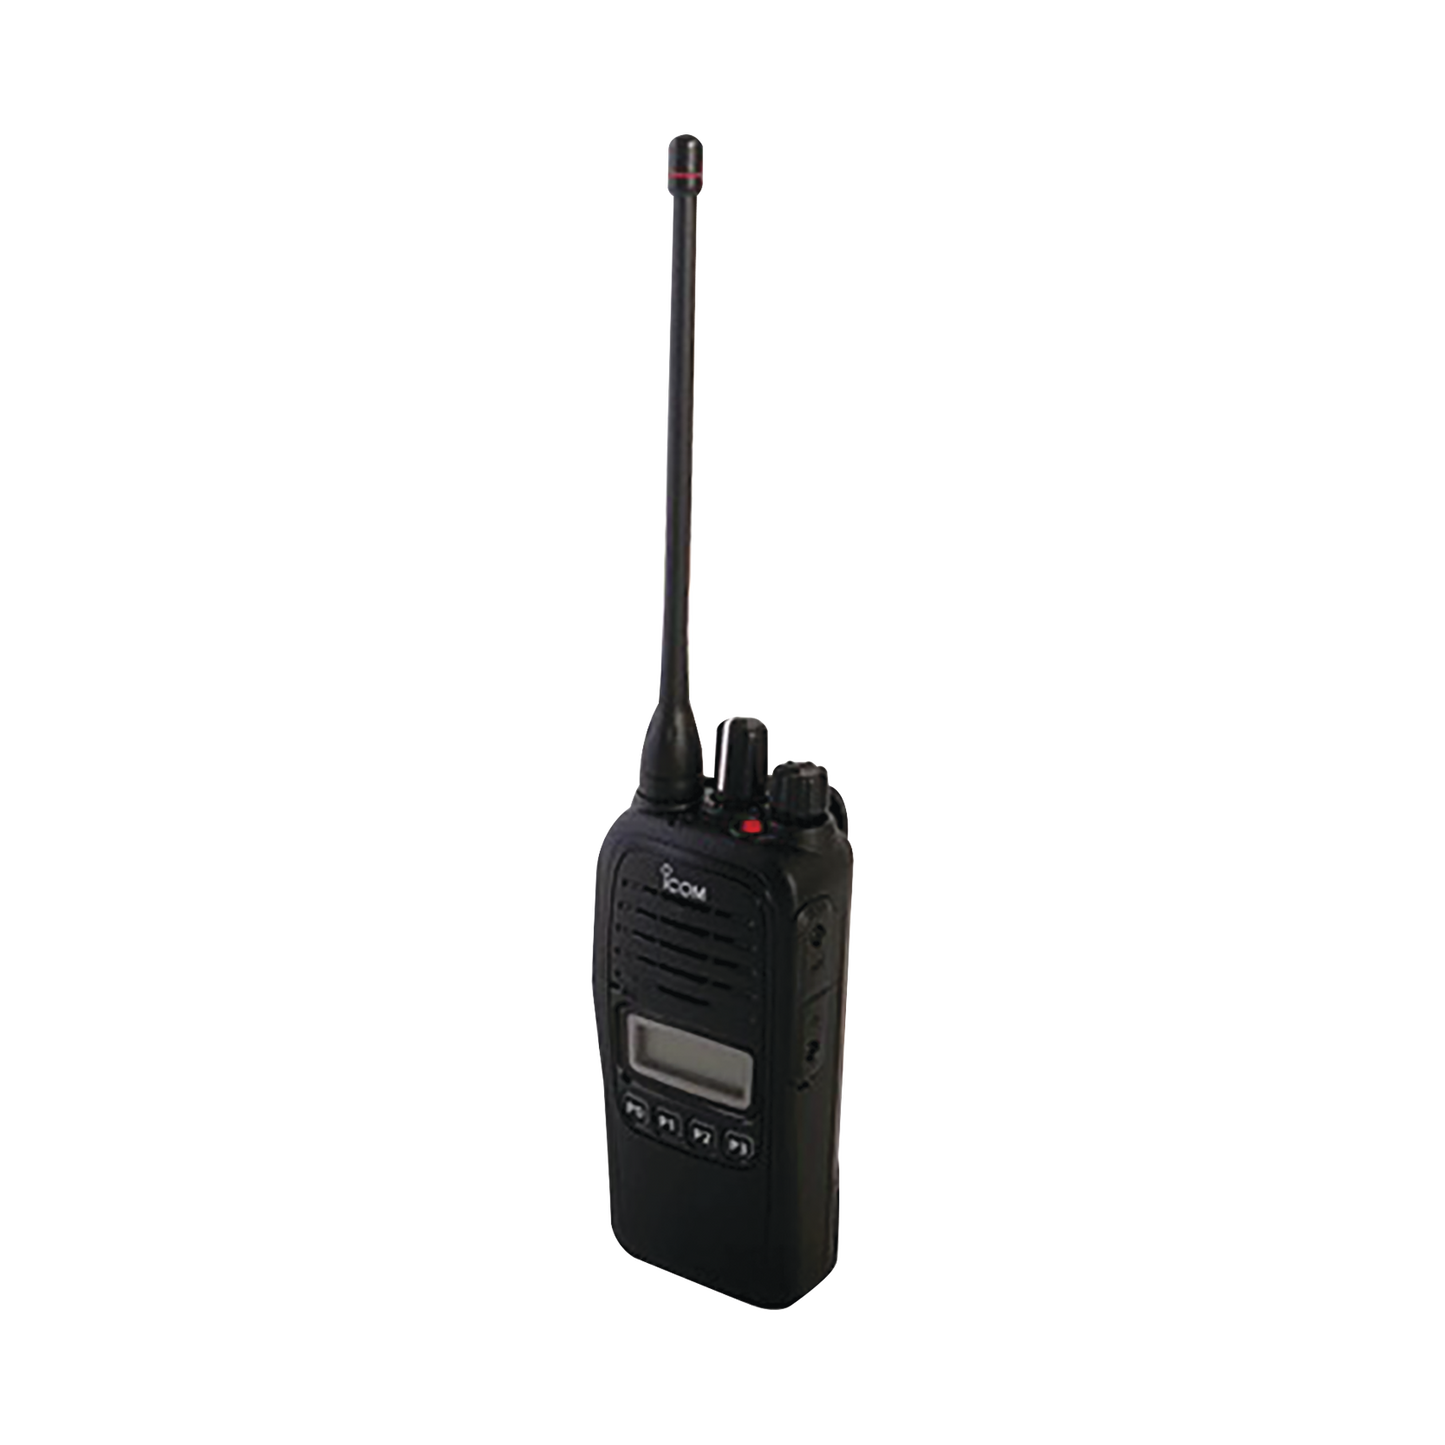 Analog Portable Radio, Frequency Range 400-470 MHz, with Display, 4 W, 128 Channels. Includes Battery, Antenna, Charger and Clip